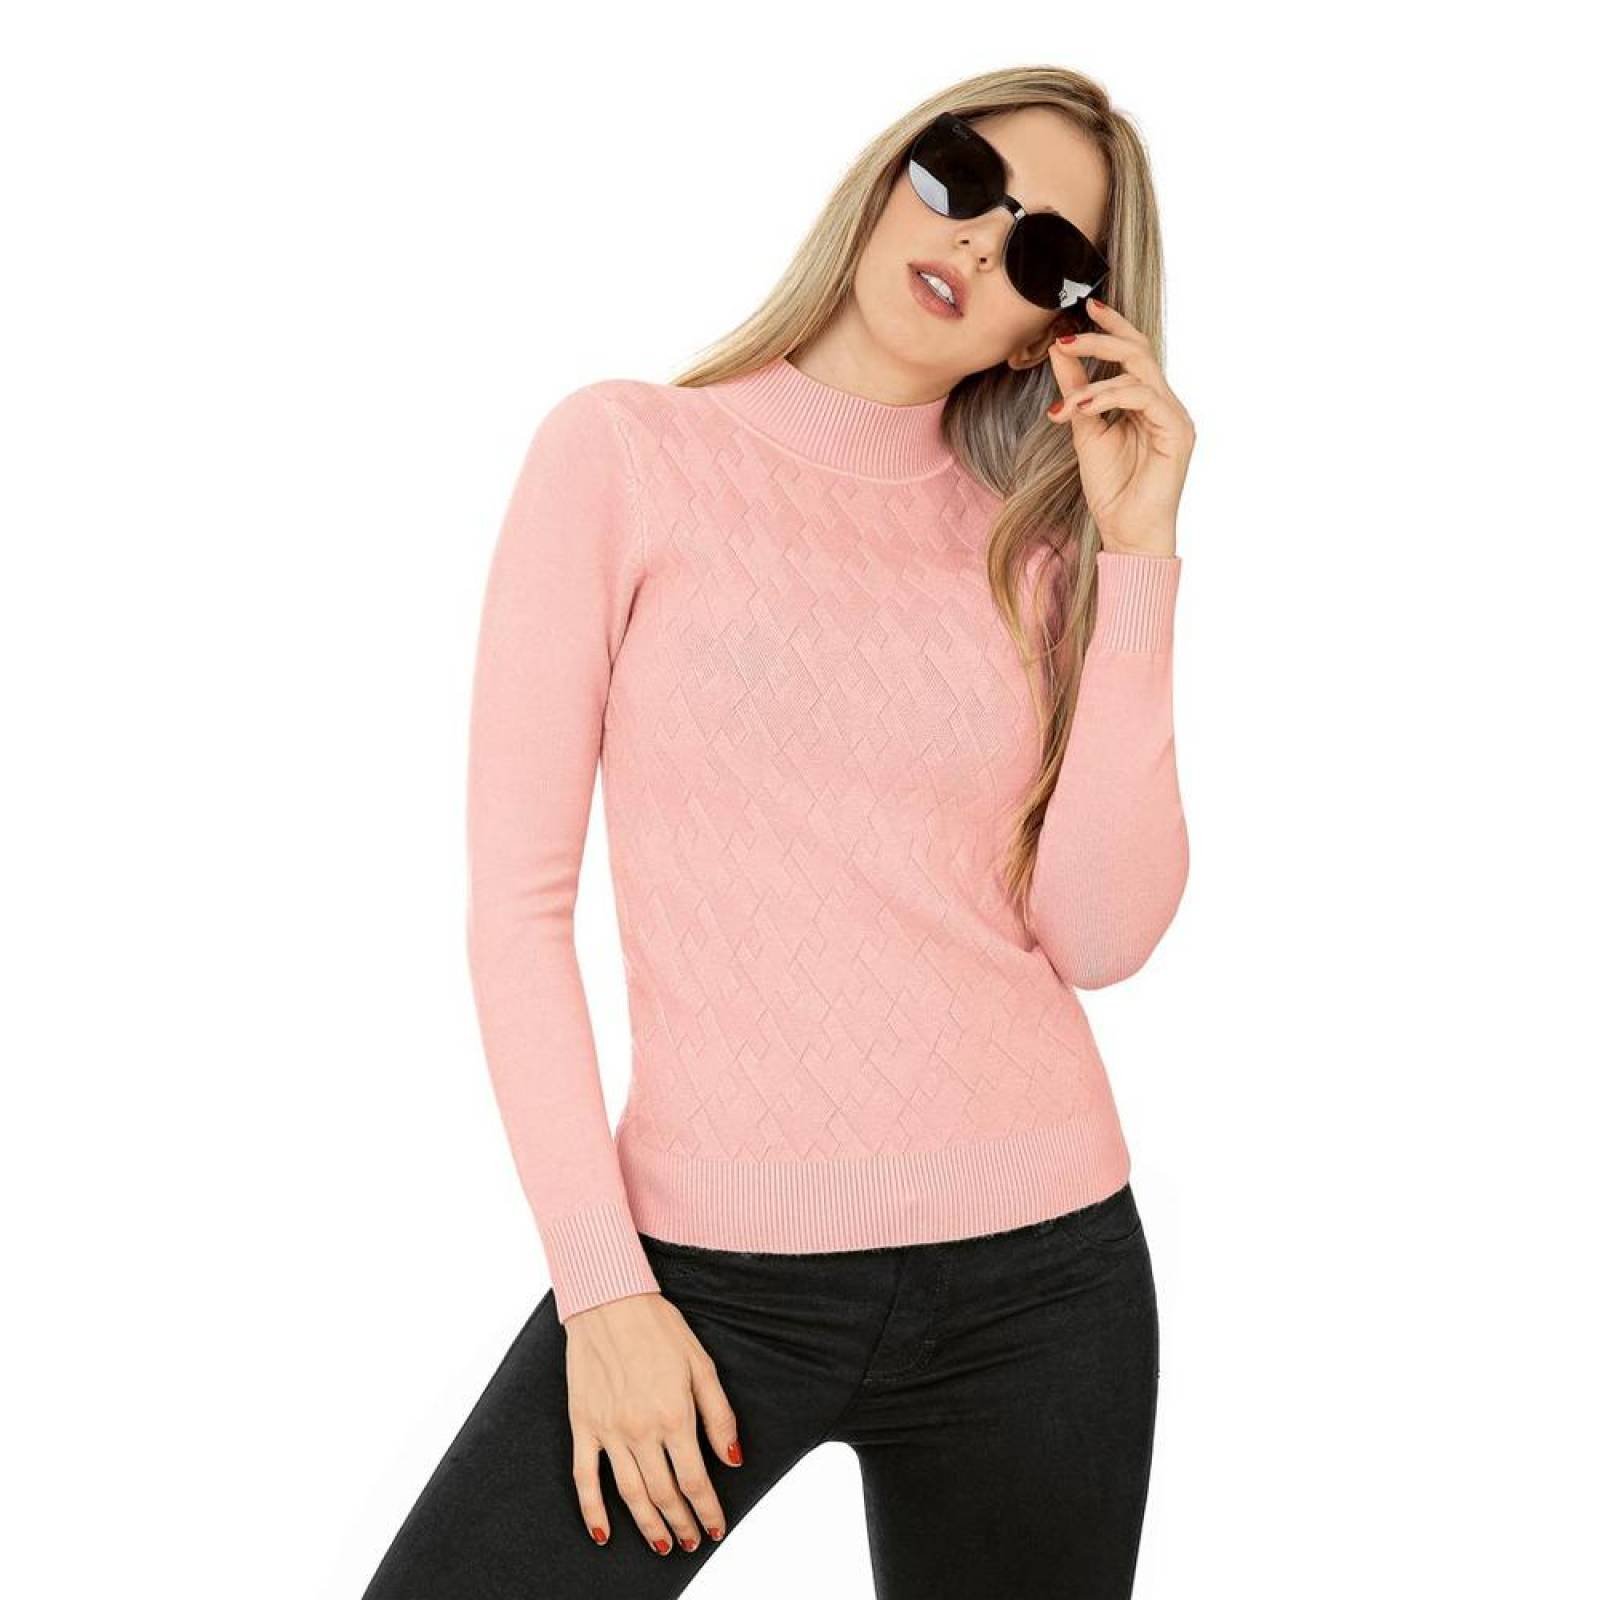 Sweater Capricho Mujer Rosa Spandex Cns-124 